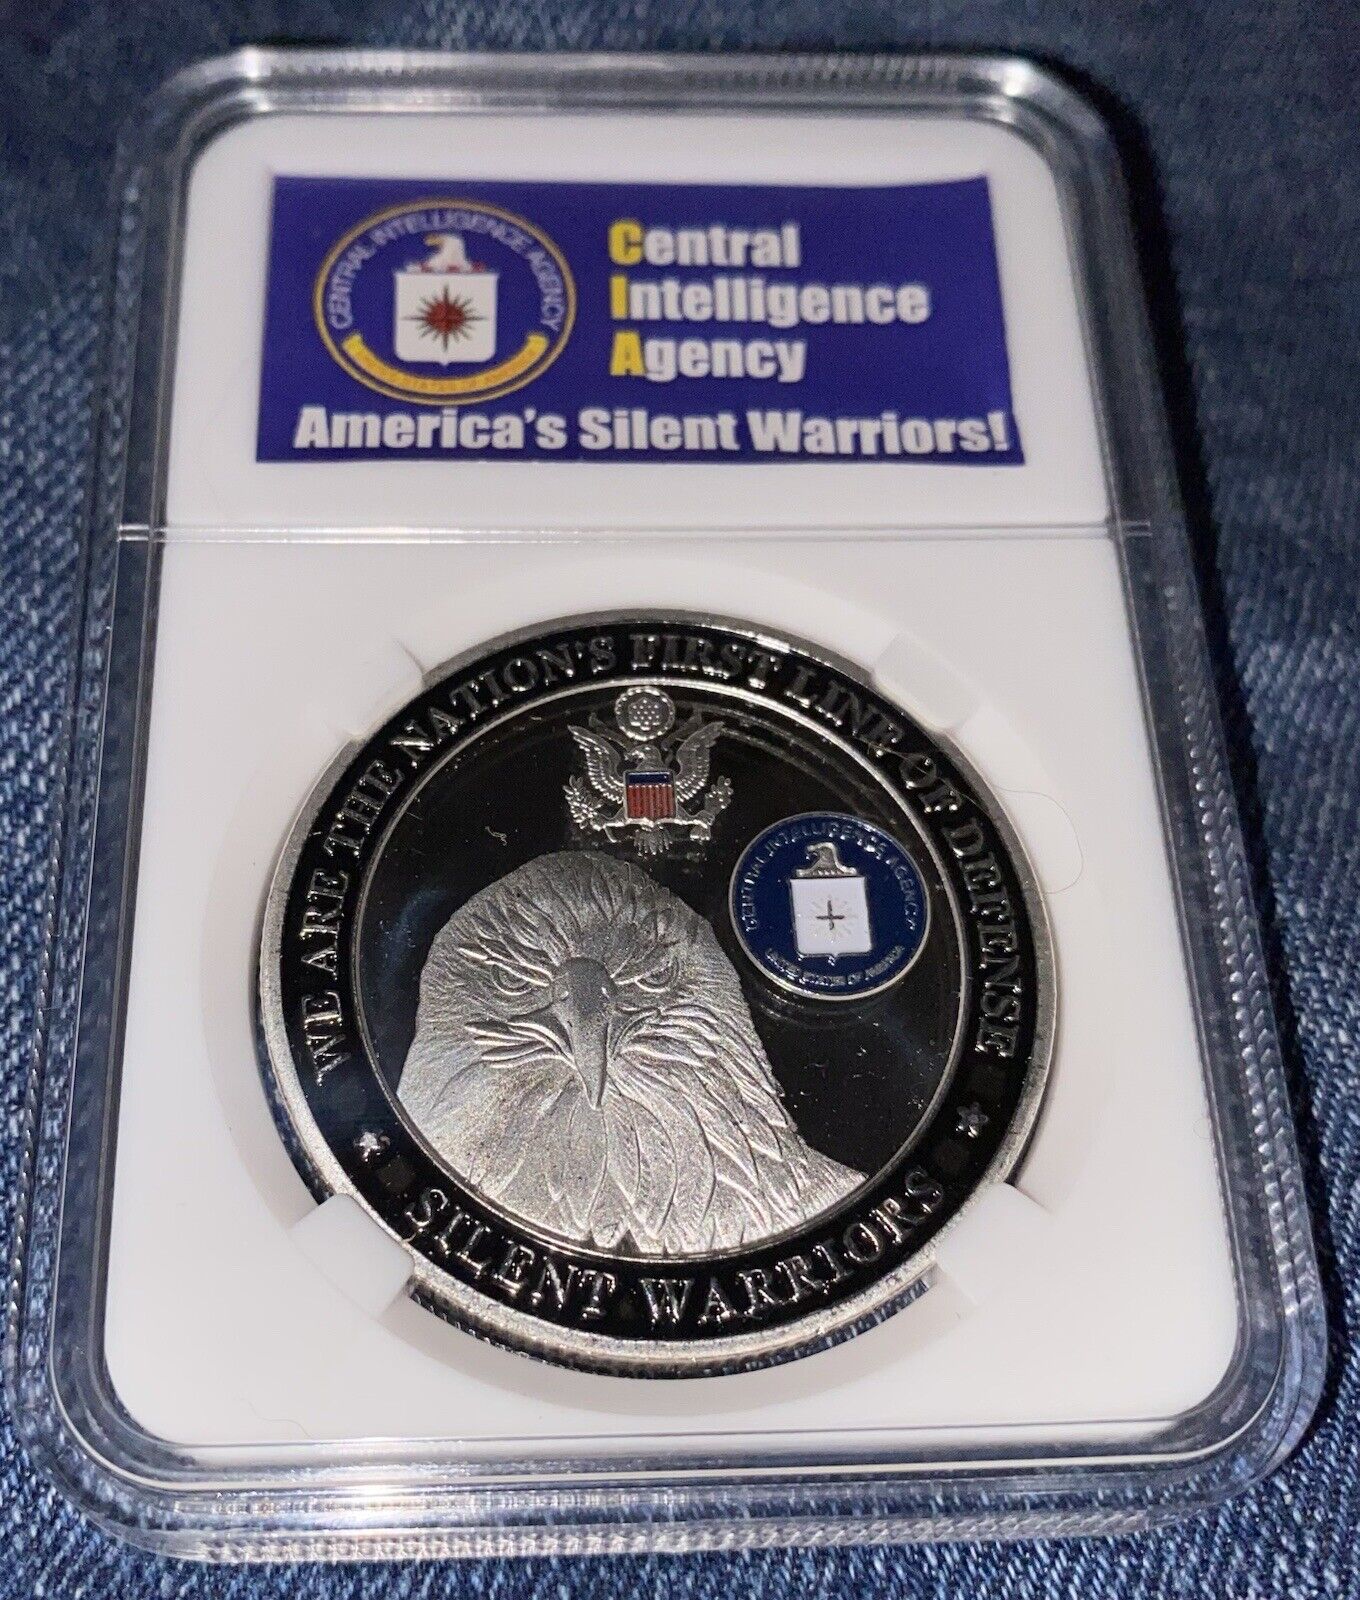 - Central Intelligence Agency CIA Challenge Coin In Display Case Spy Group CIA